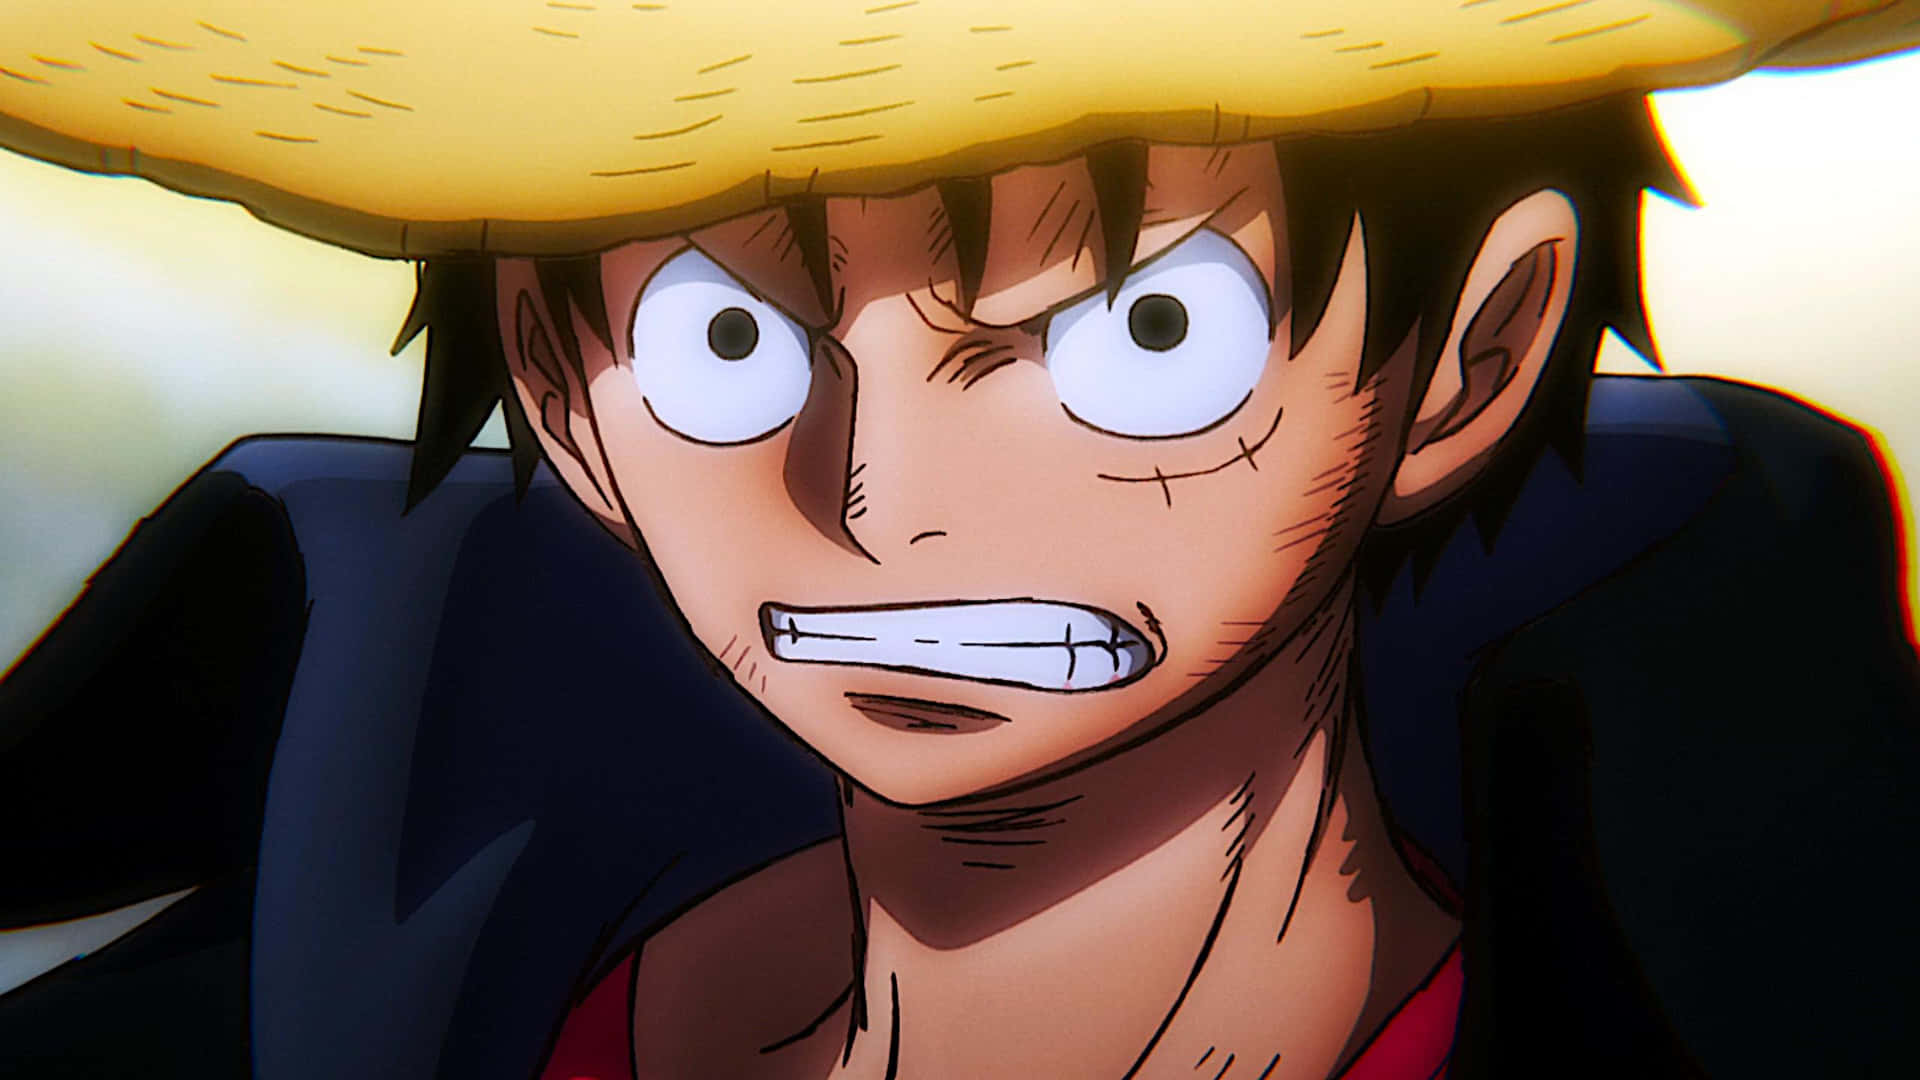 “The Pirate King- Luffy ready to seek the One Piece”